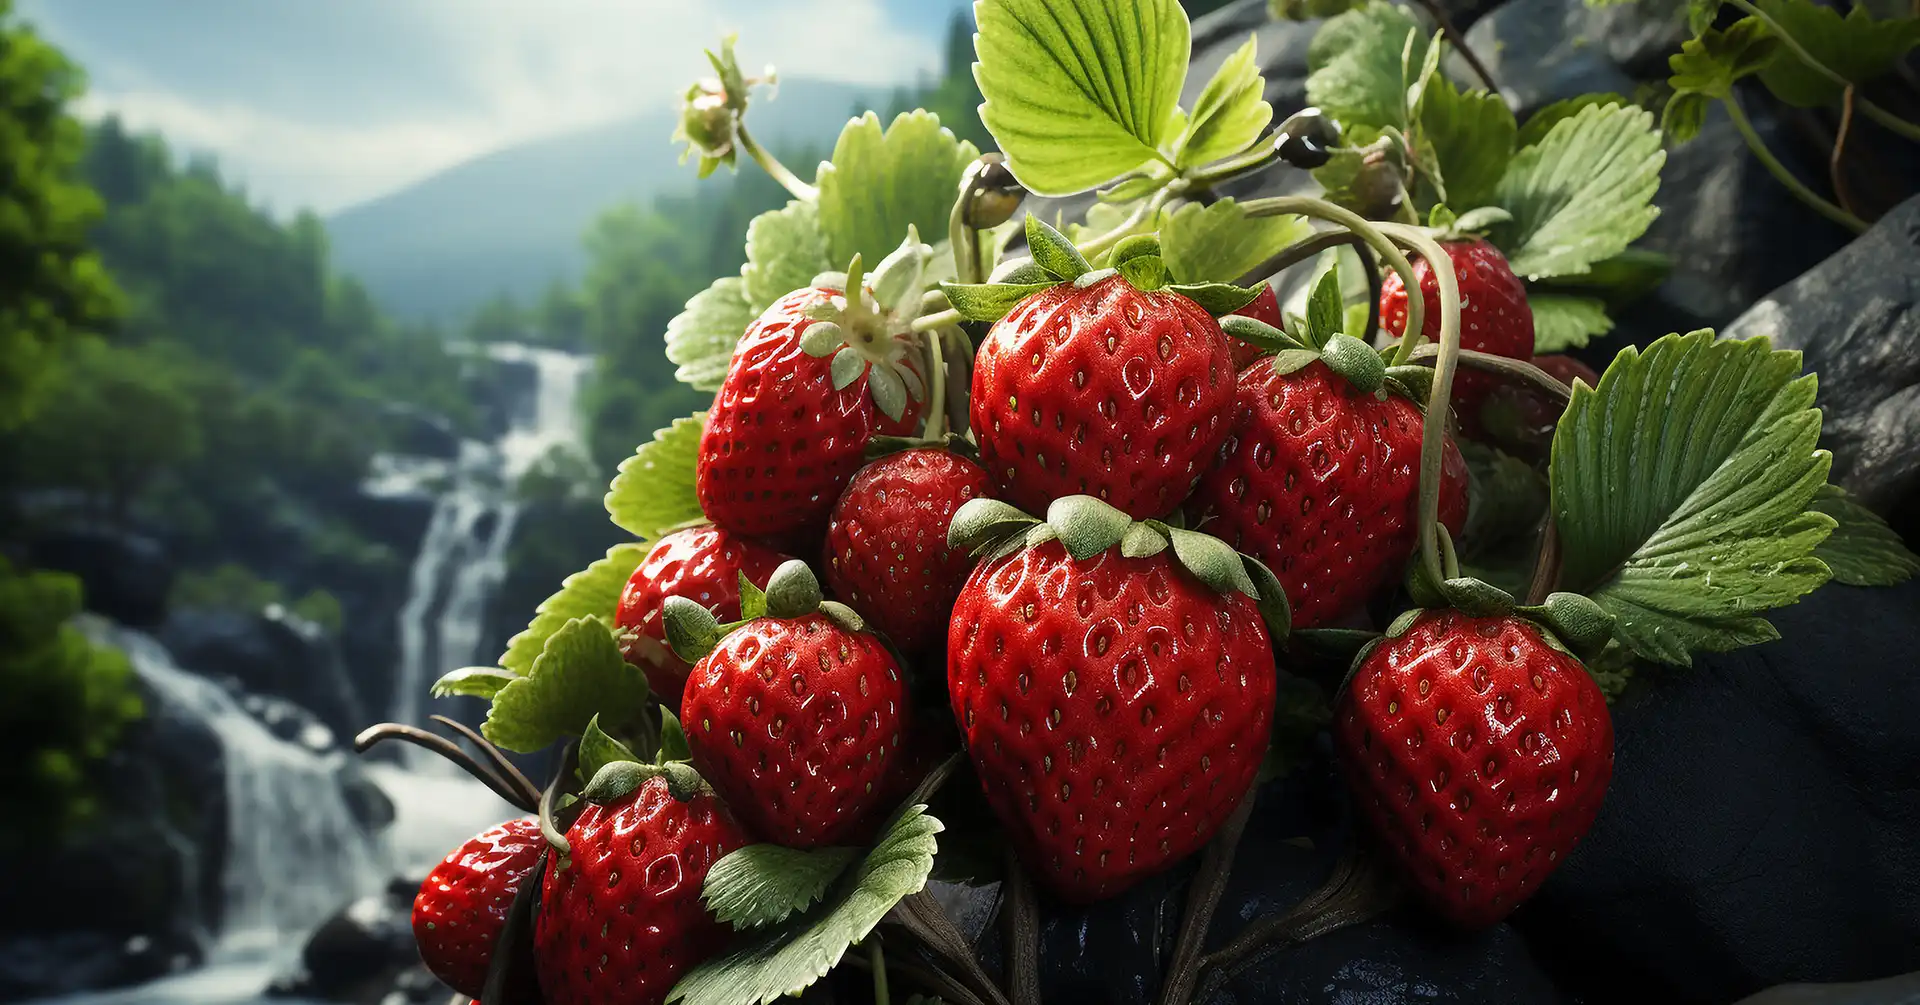 can you eat mock strawberries